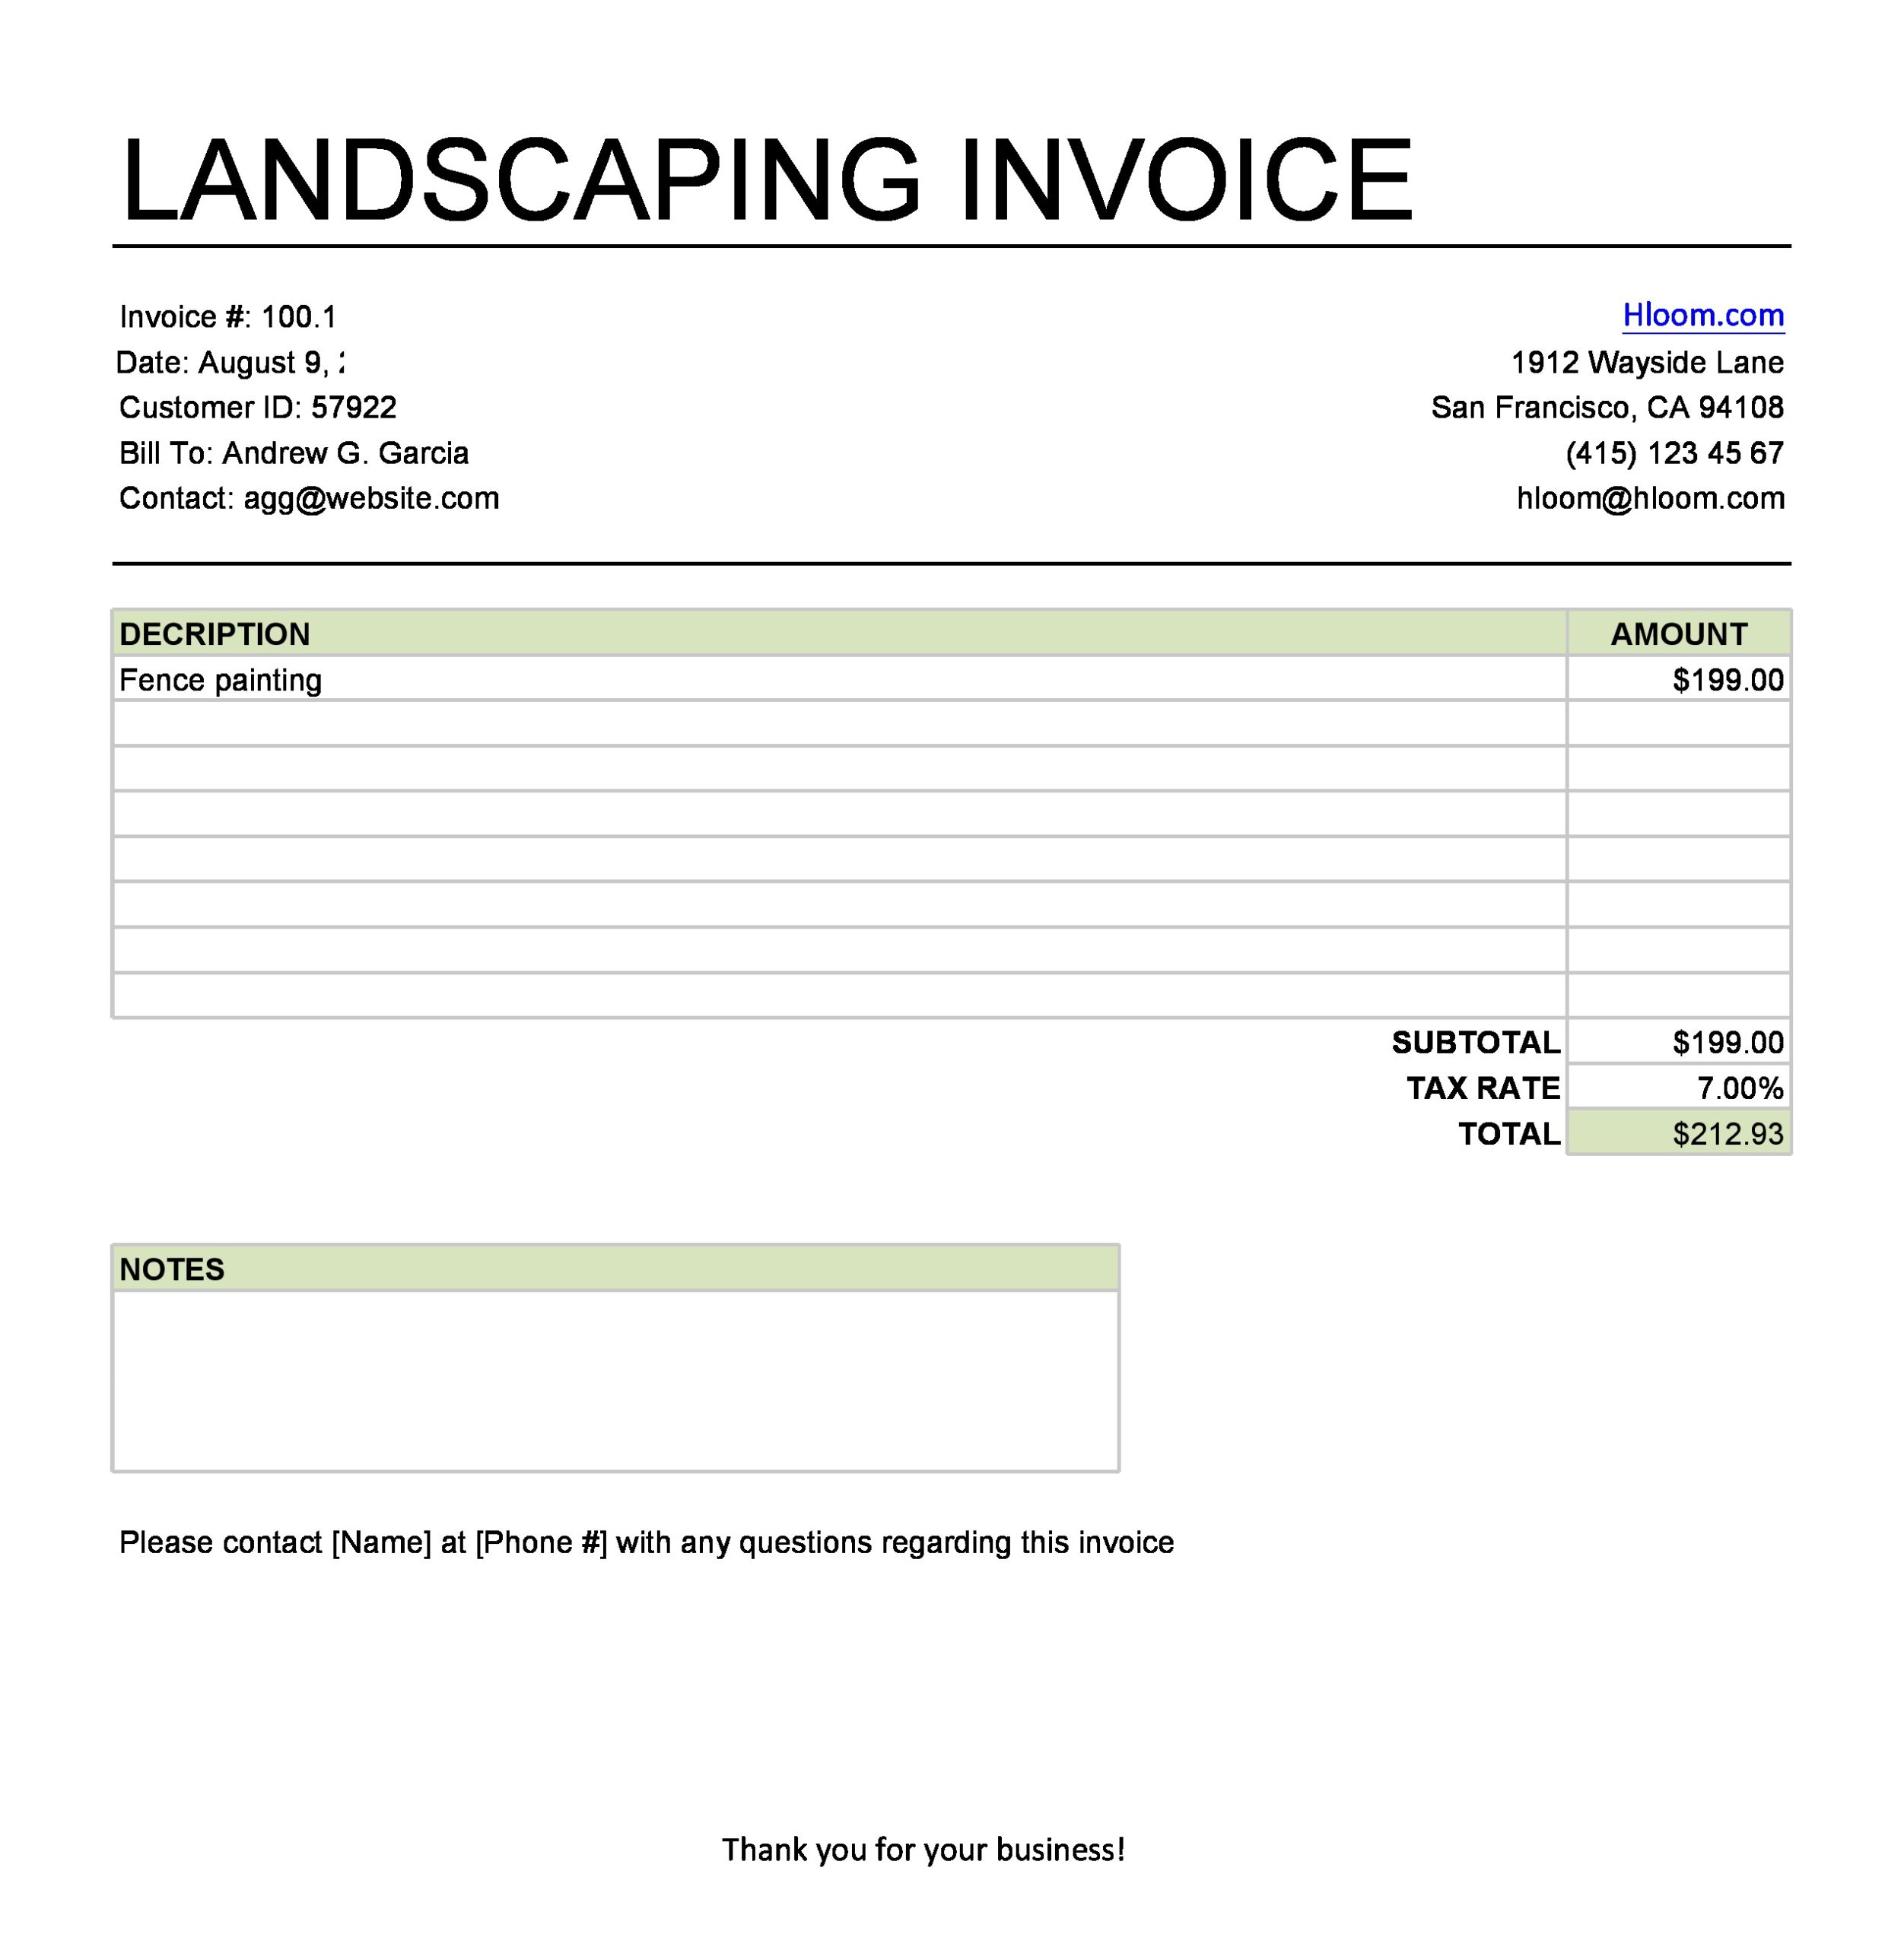 Free landscaping invoice 27